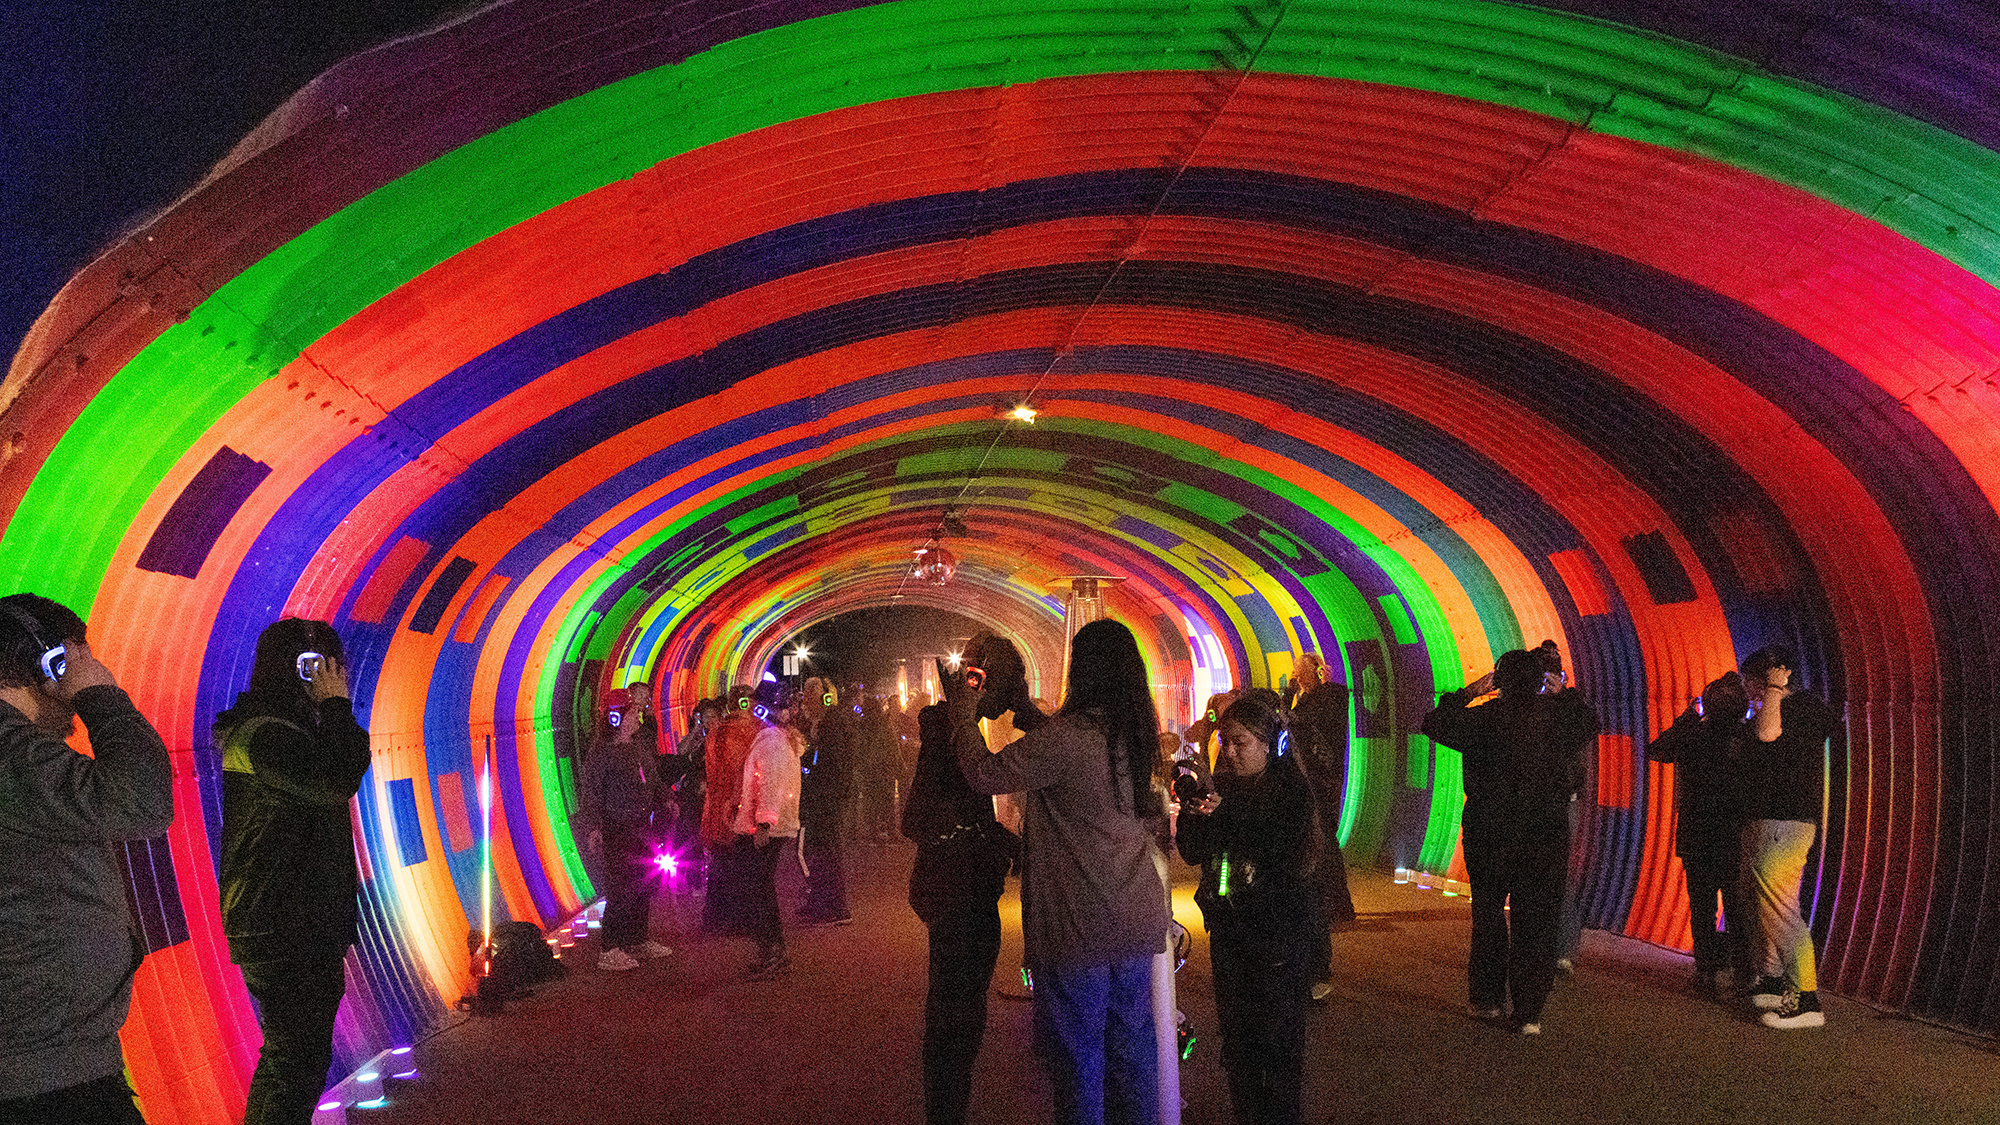 People participating in silent disco in brightly colored tunnel